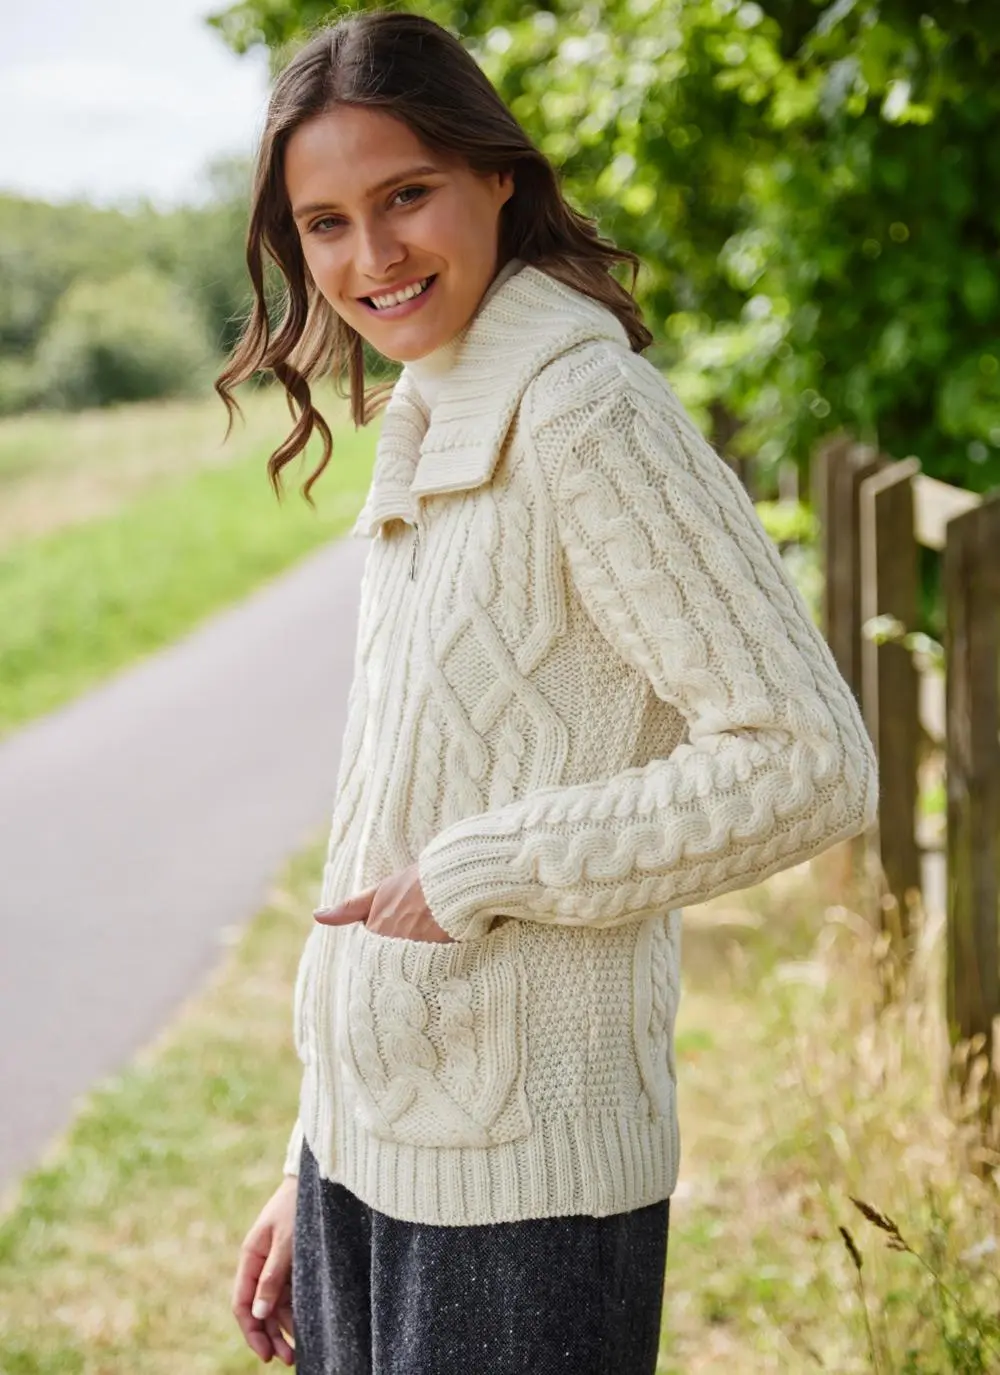 brown haired woman in park wearing cream aran zip cardigan with hand in pocket